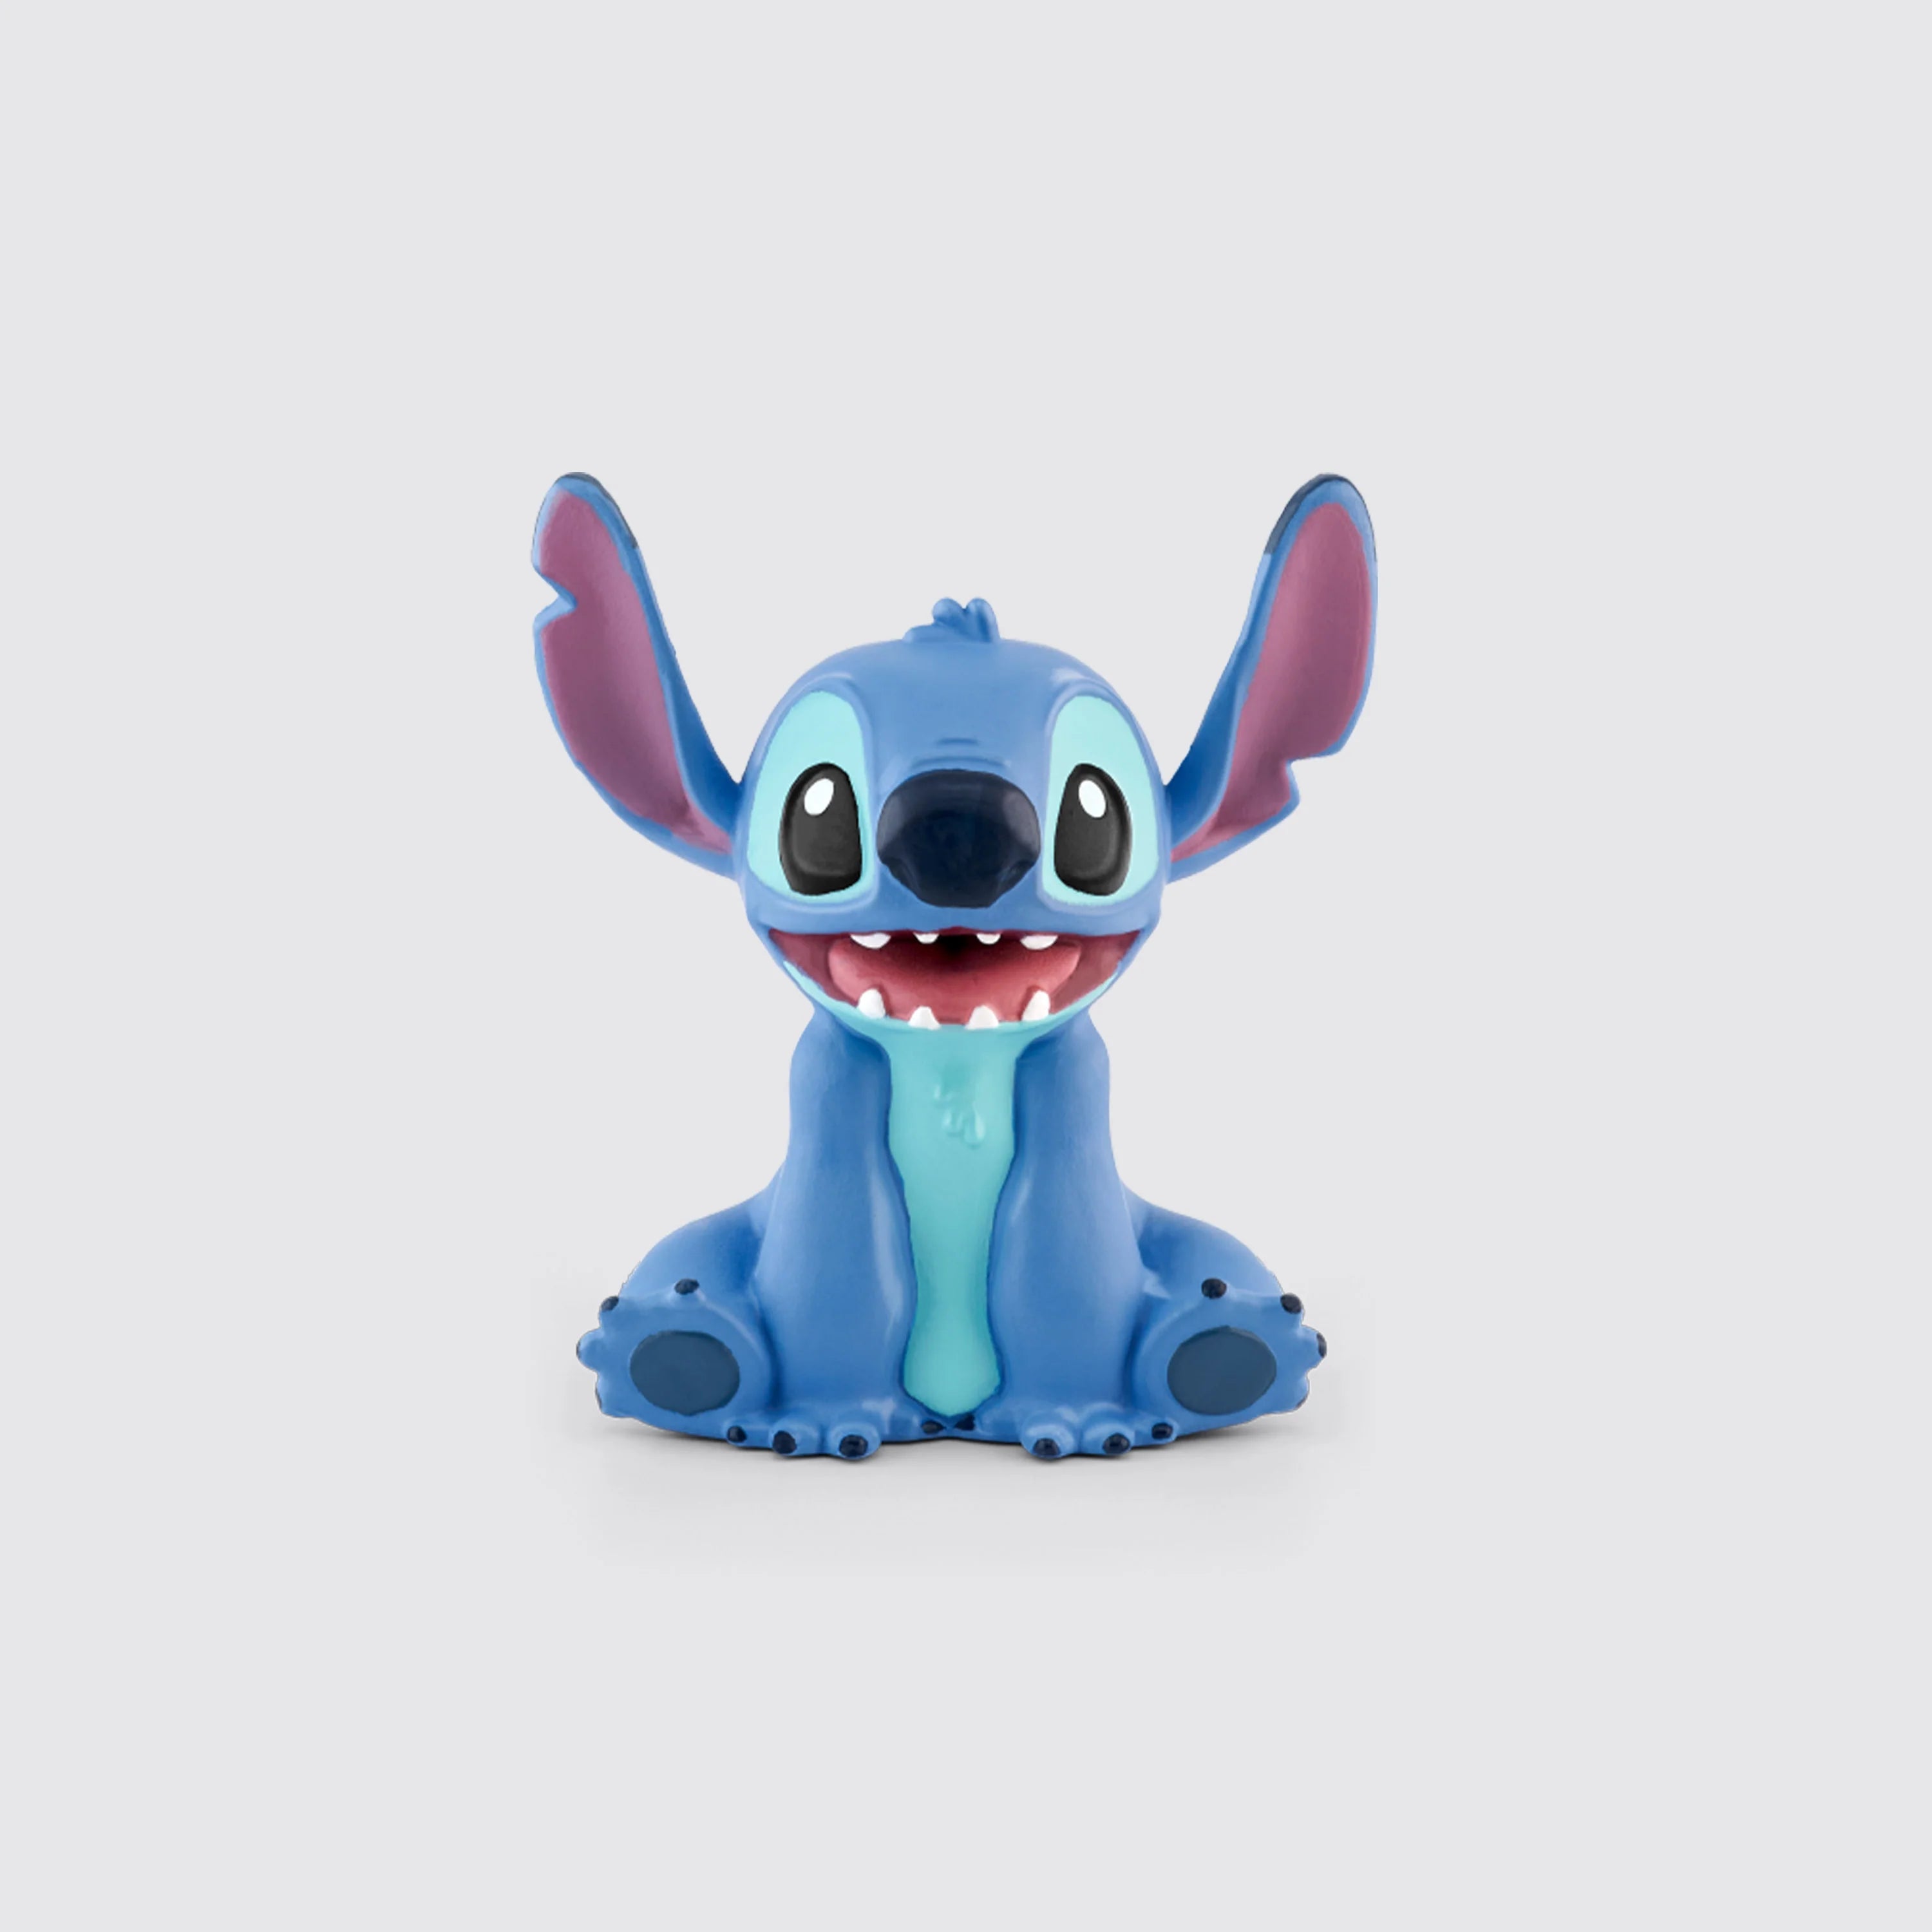 Disney Lilo and Stitch Monopoly Game Now At TruffleShuffle! -  TruffleShuffle.com Official Blog